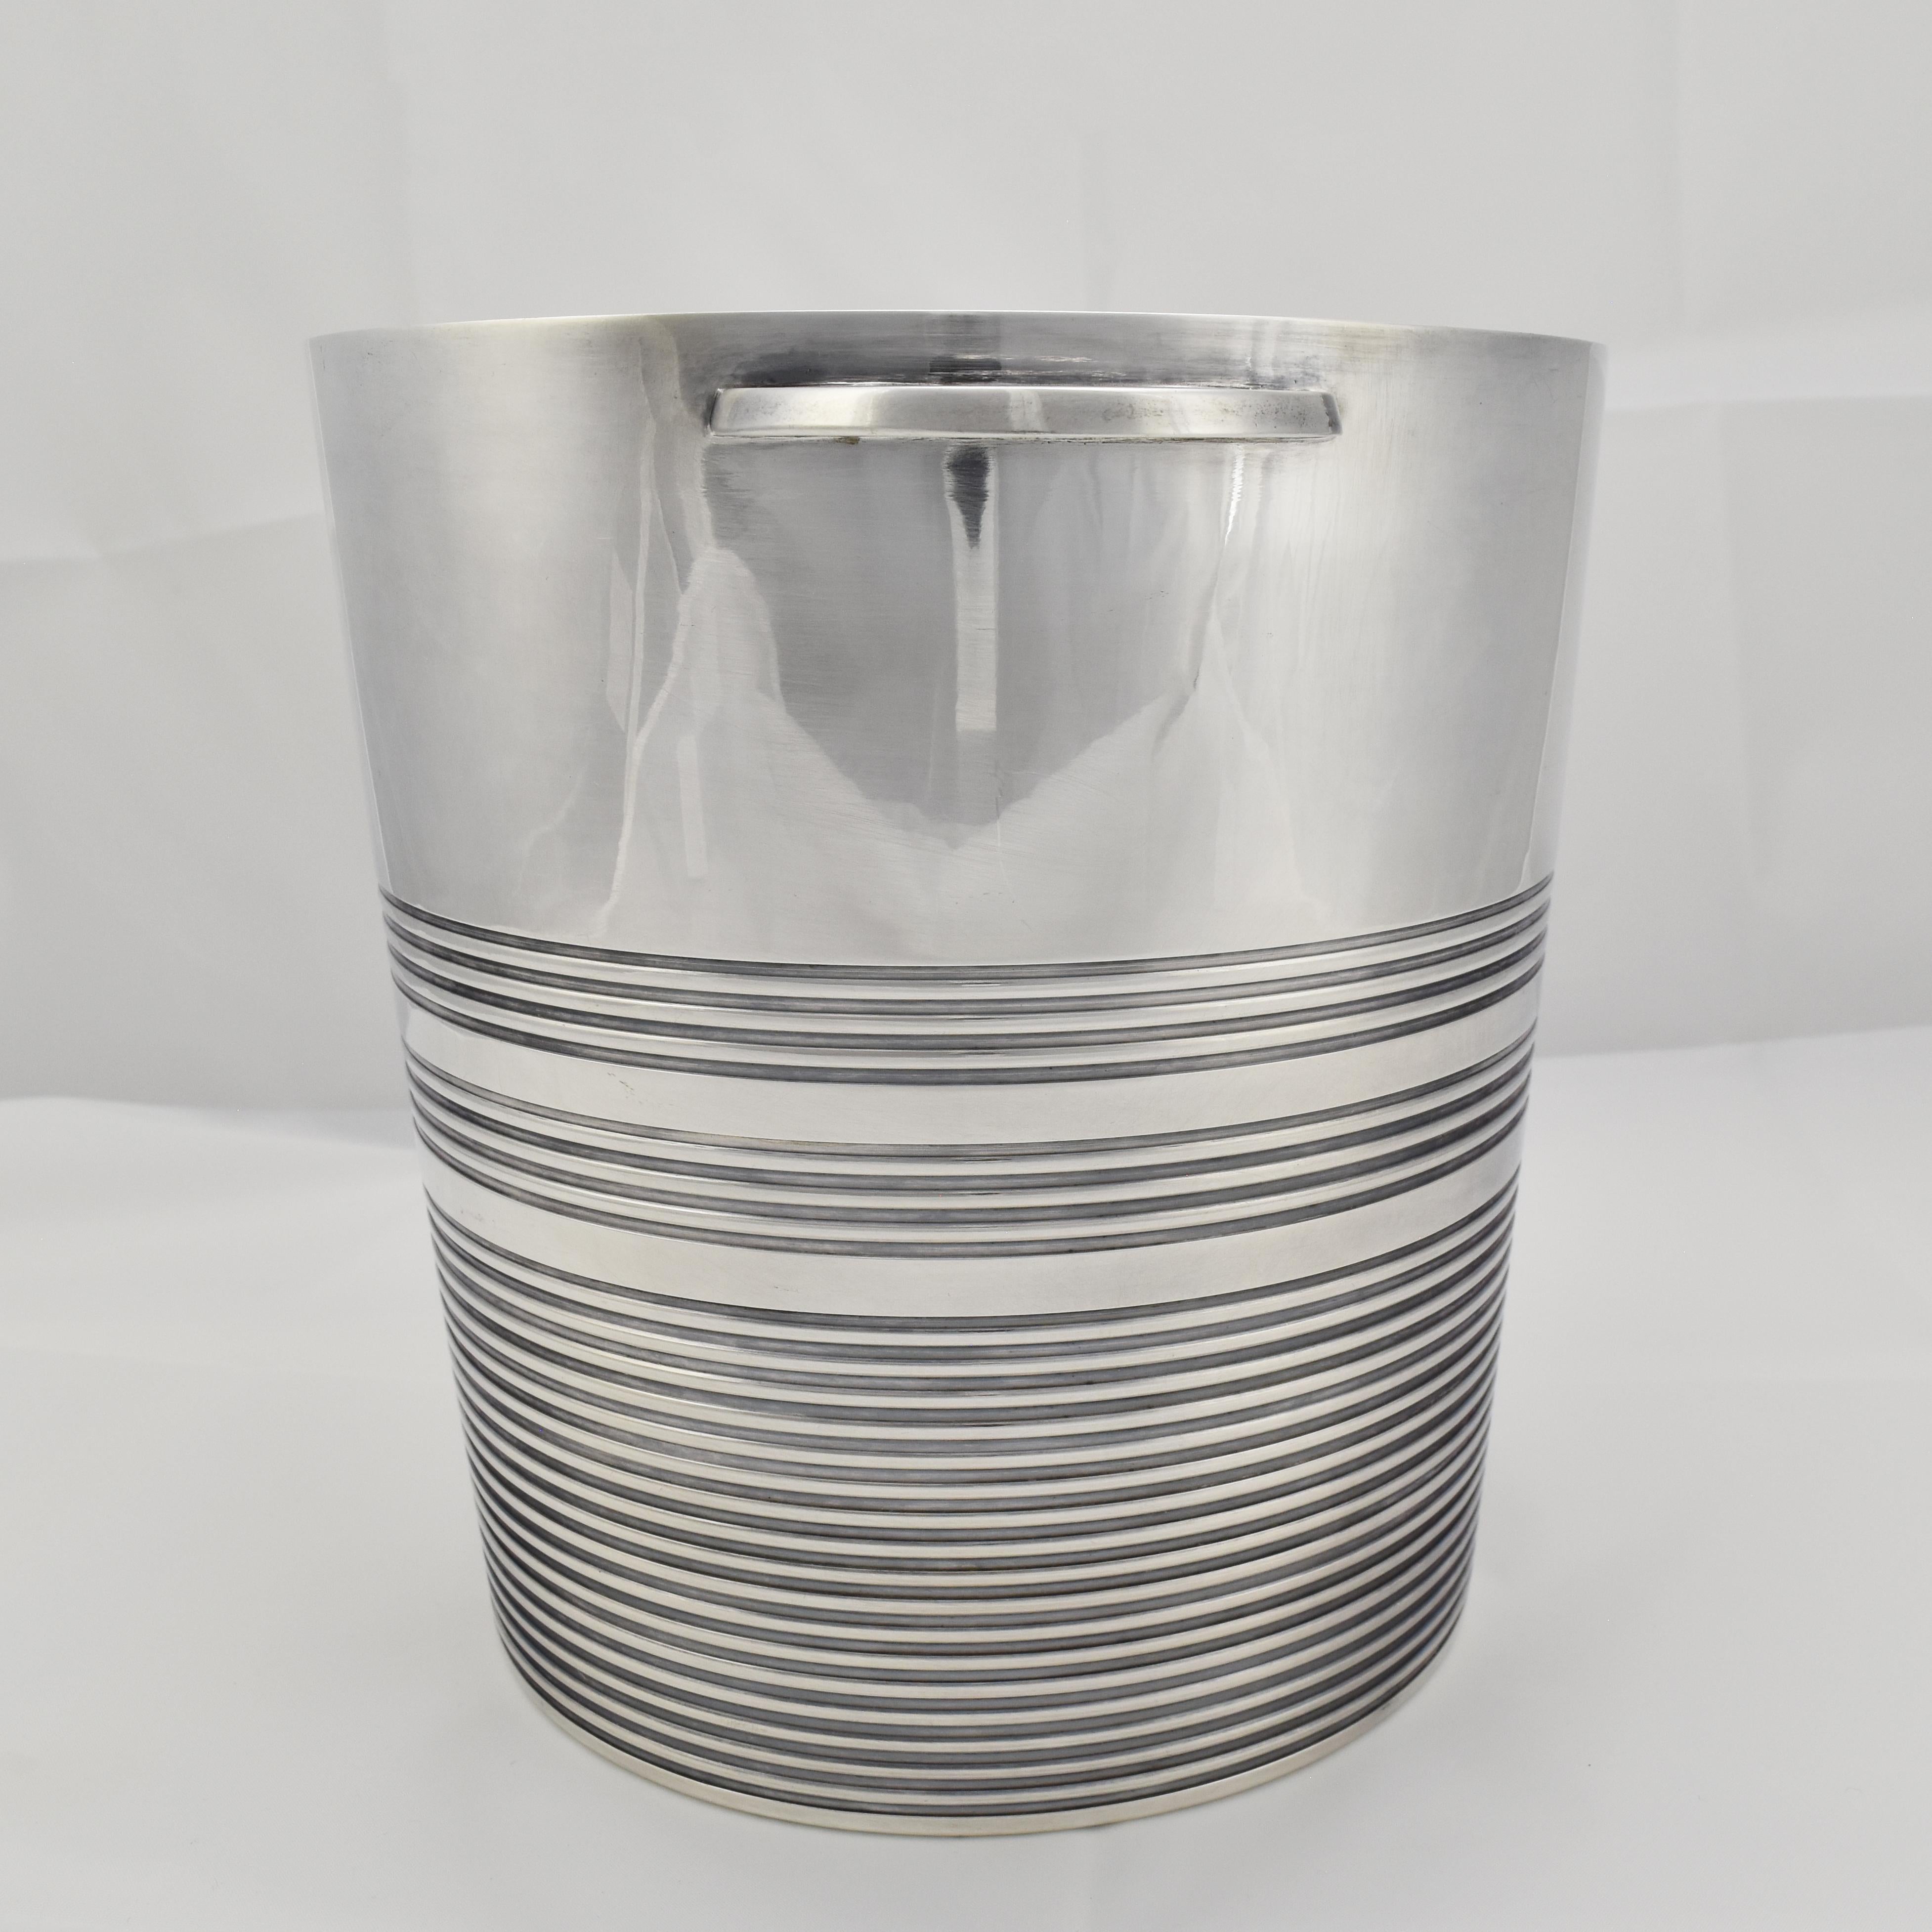 French Art Deco Champagne Ice Bucket / Wine Cooler by Orfèvrerie Ercuis Paris For Sale 5